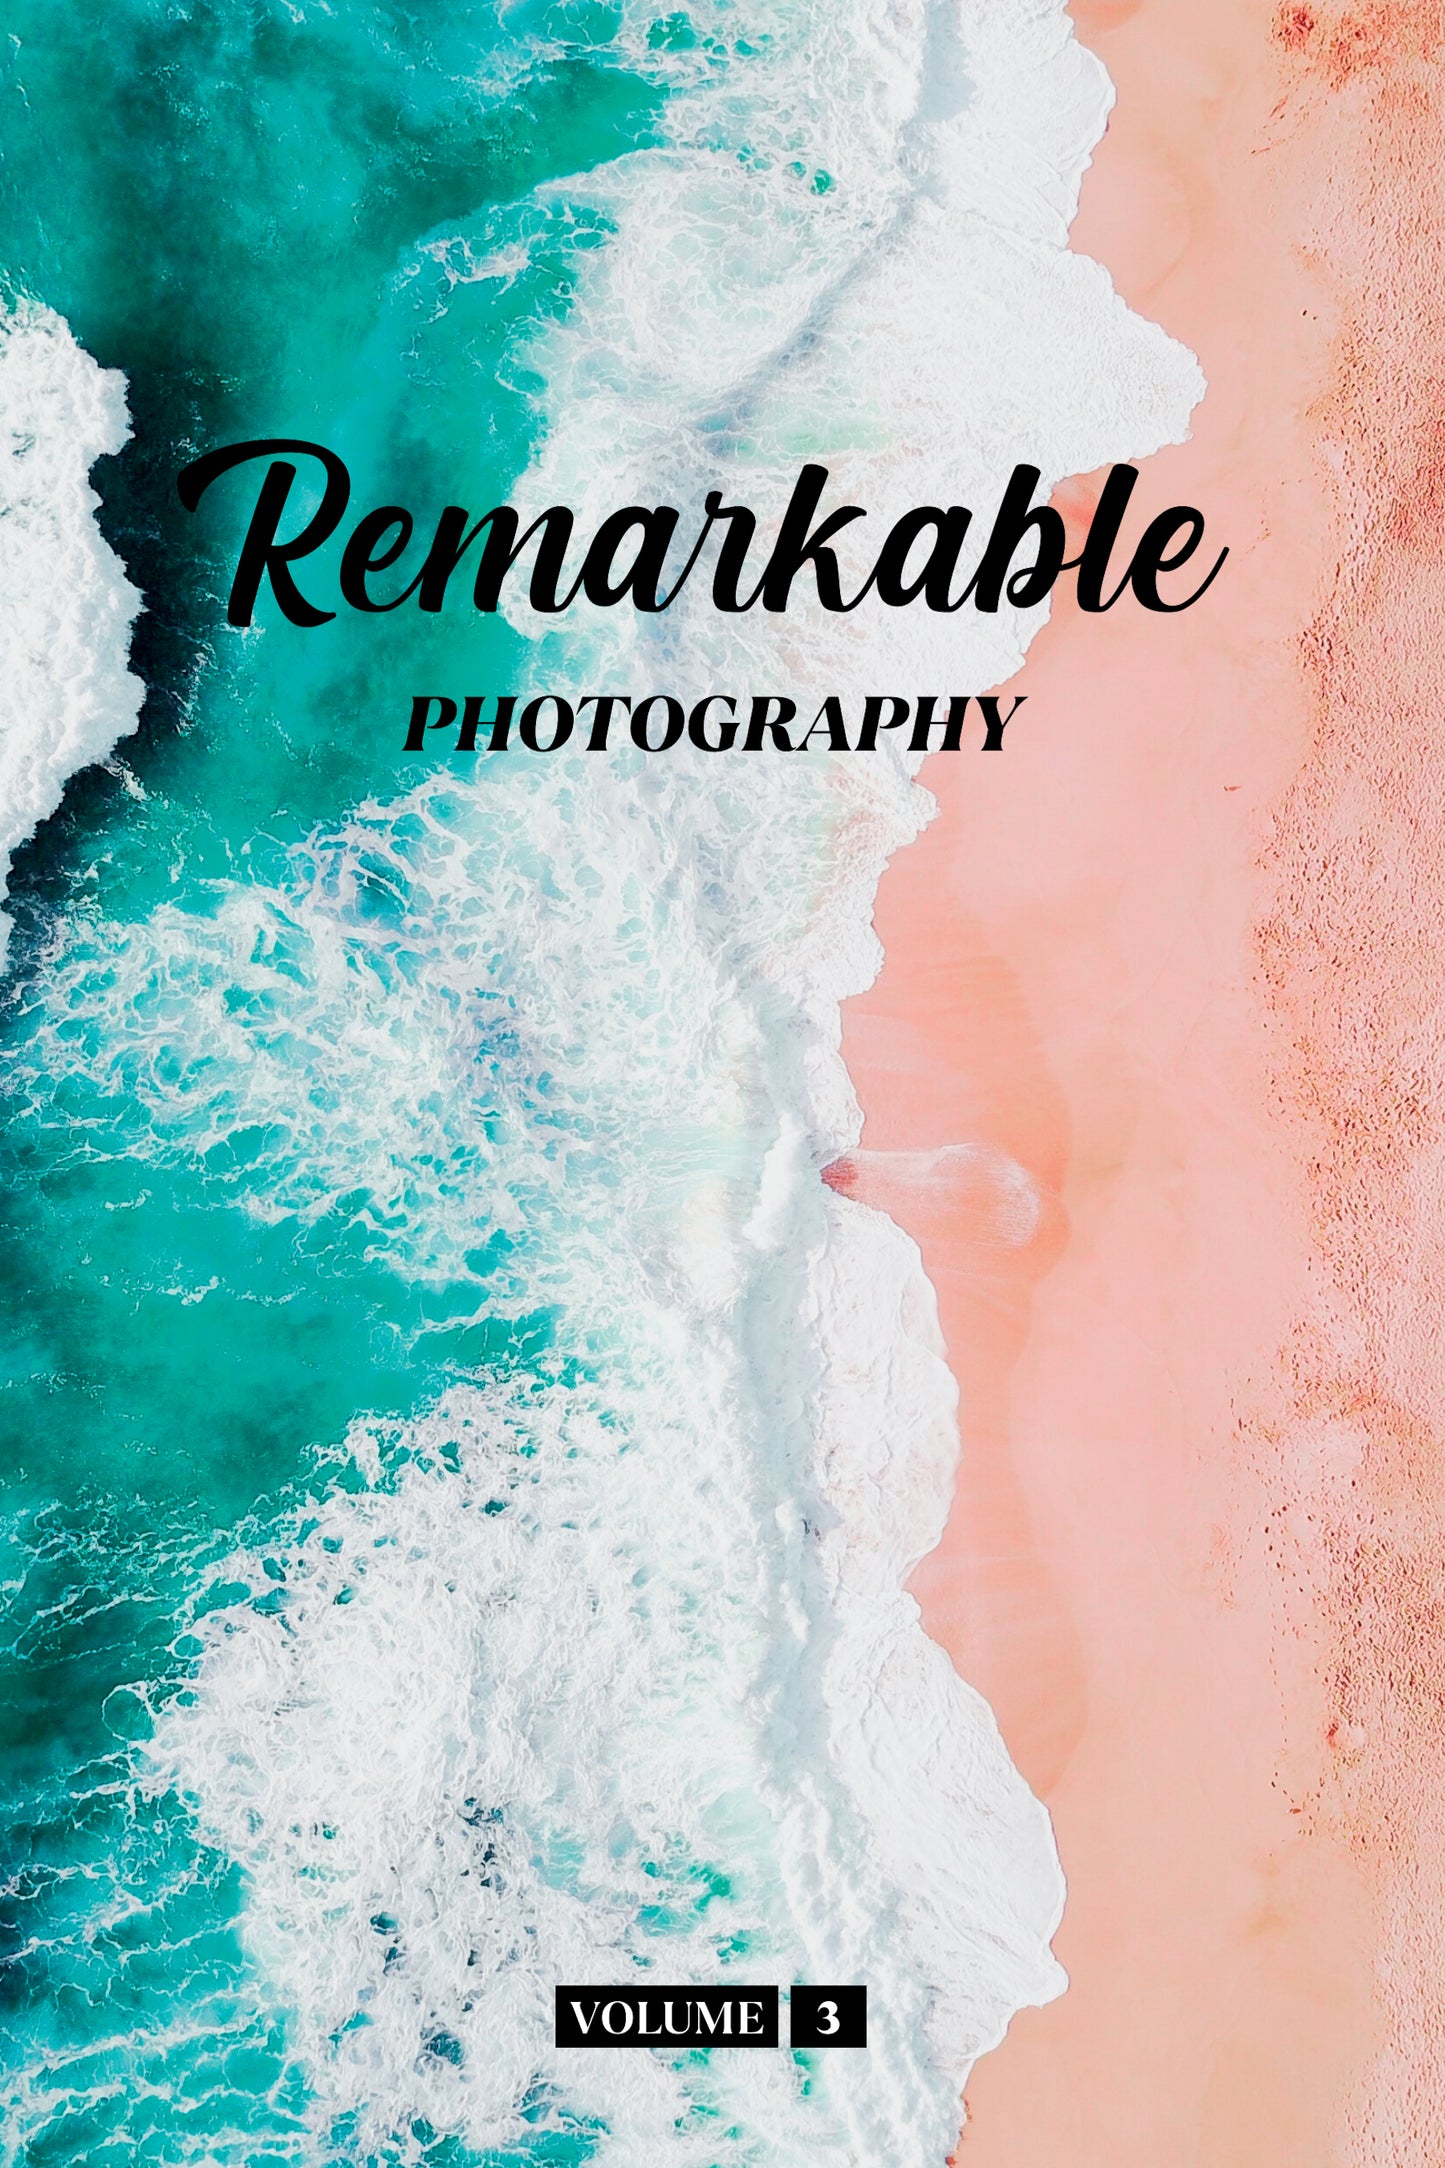 Remarkable Photography Volume 3 (Physical Book)